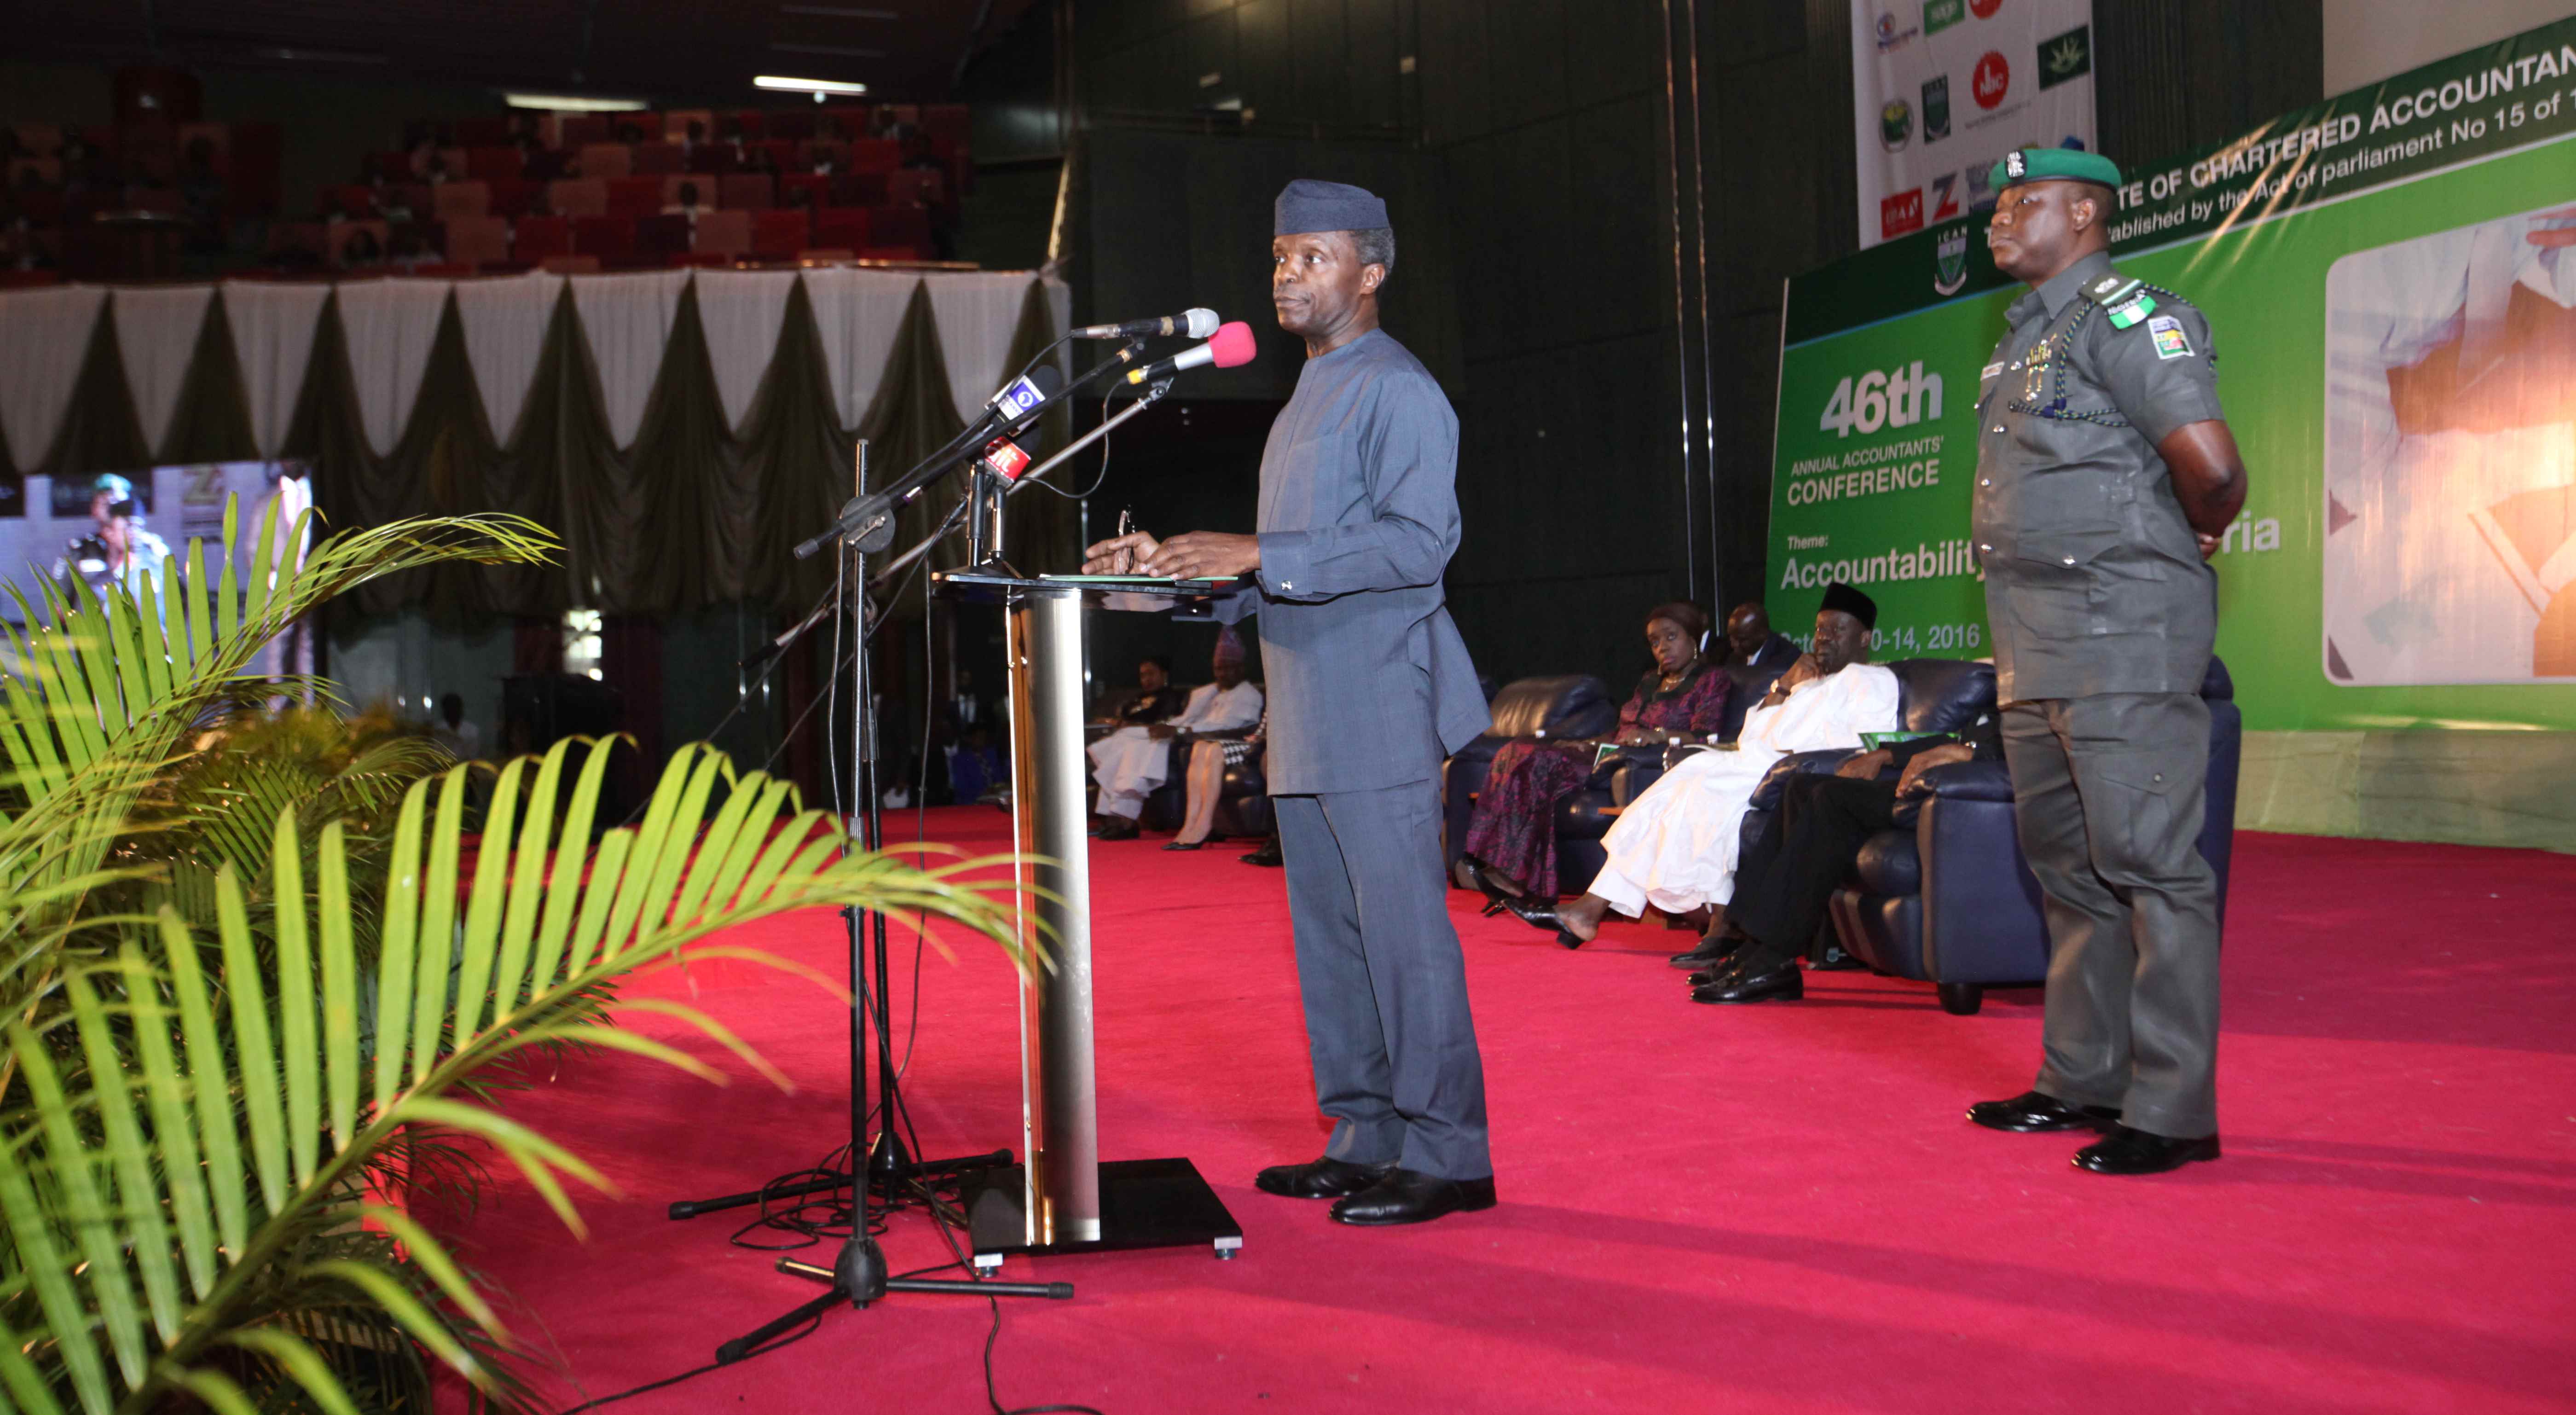 VP Osinbajo Attends The 46th Annual Accountants’ Conference ICC Abuja, On 11/10/2016